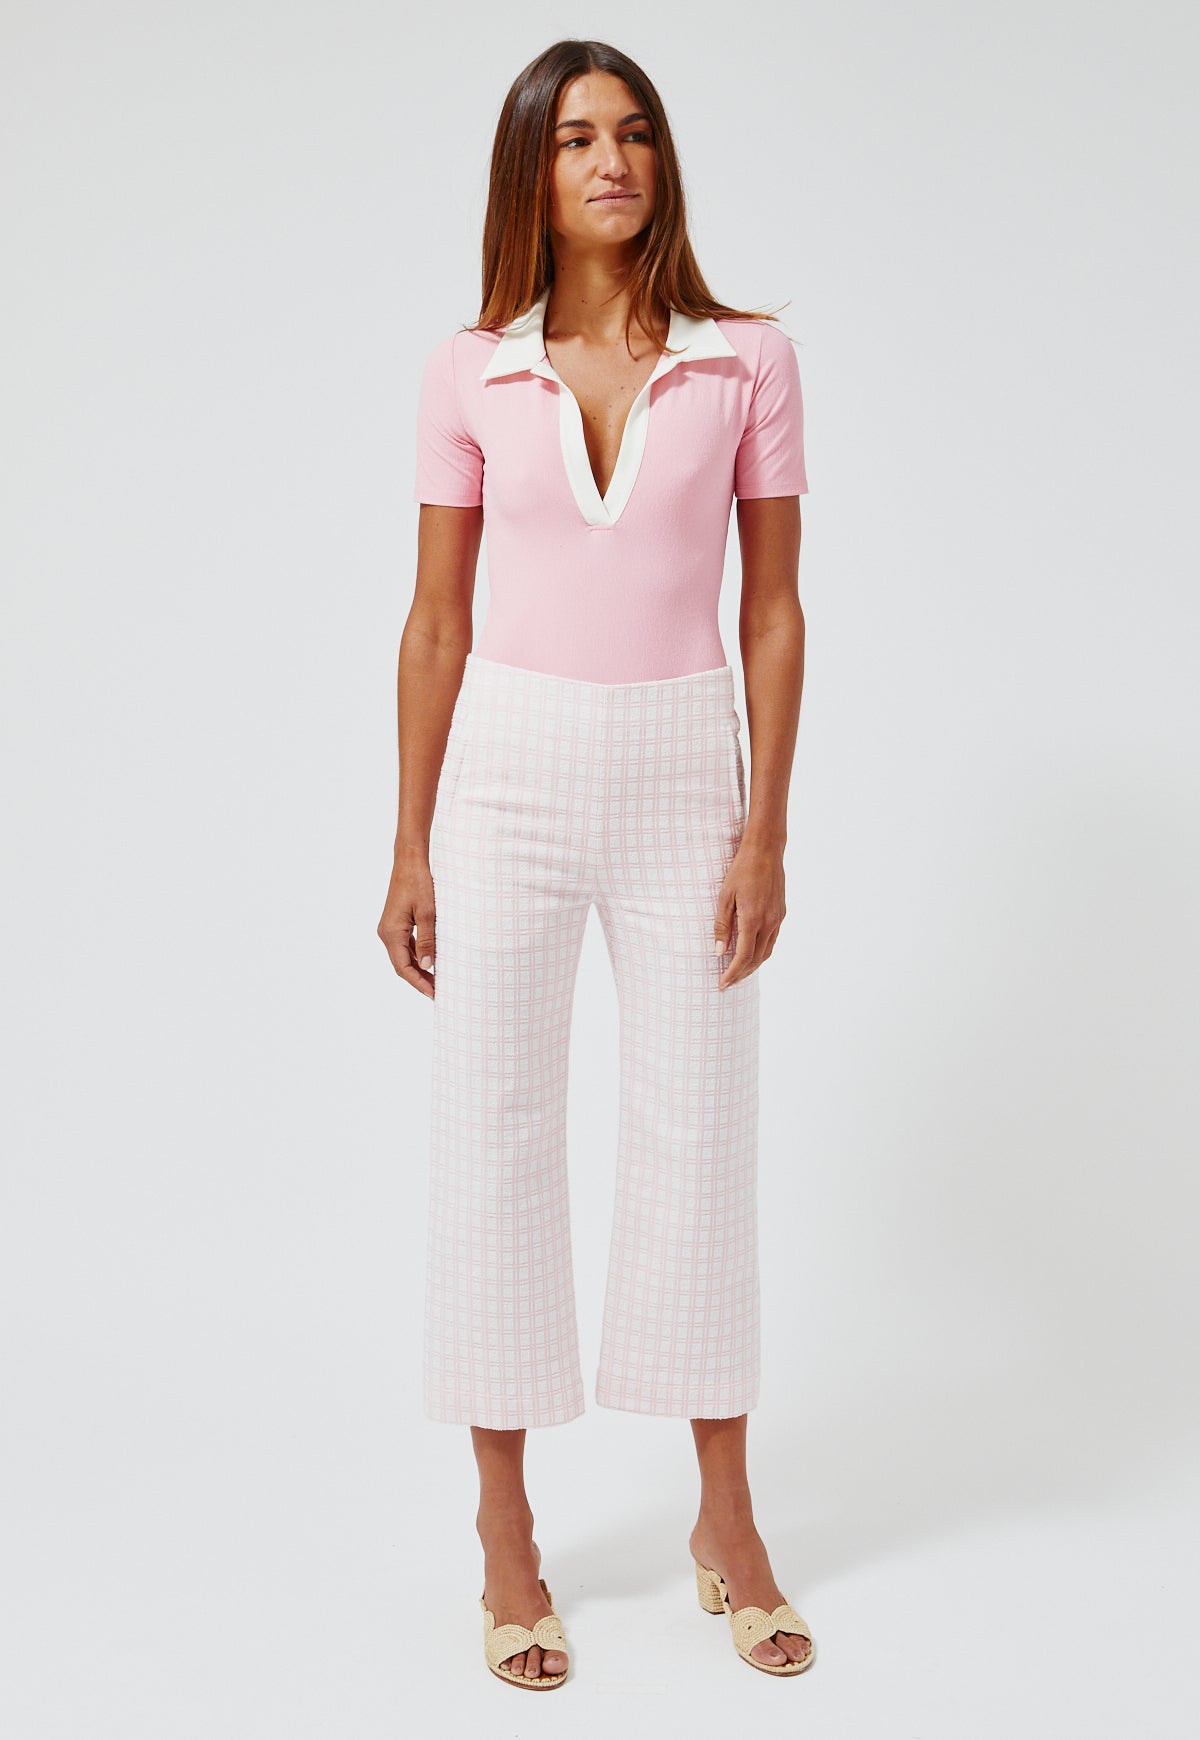 THE STRAIGHT LEG TROUSER in VINTAGE PINK CHECK BOUCLE COTTON